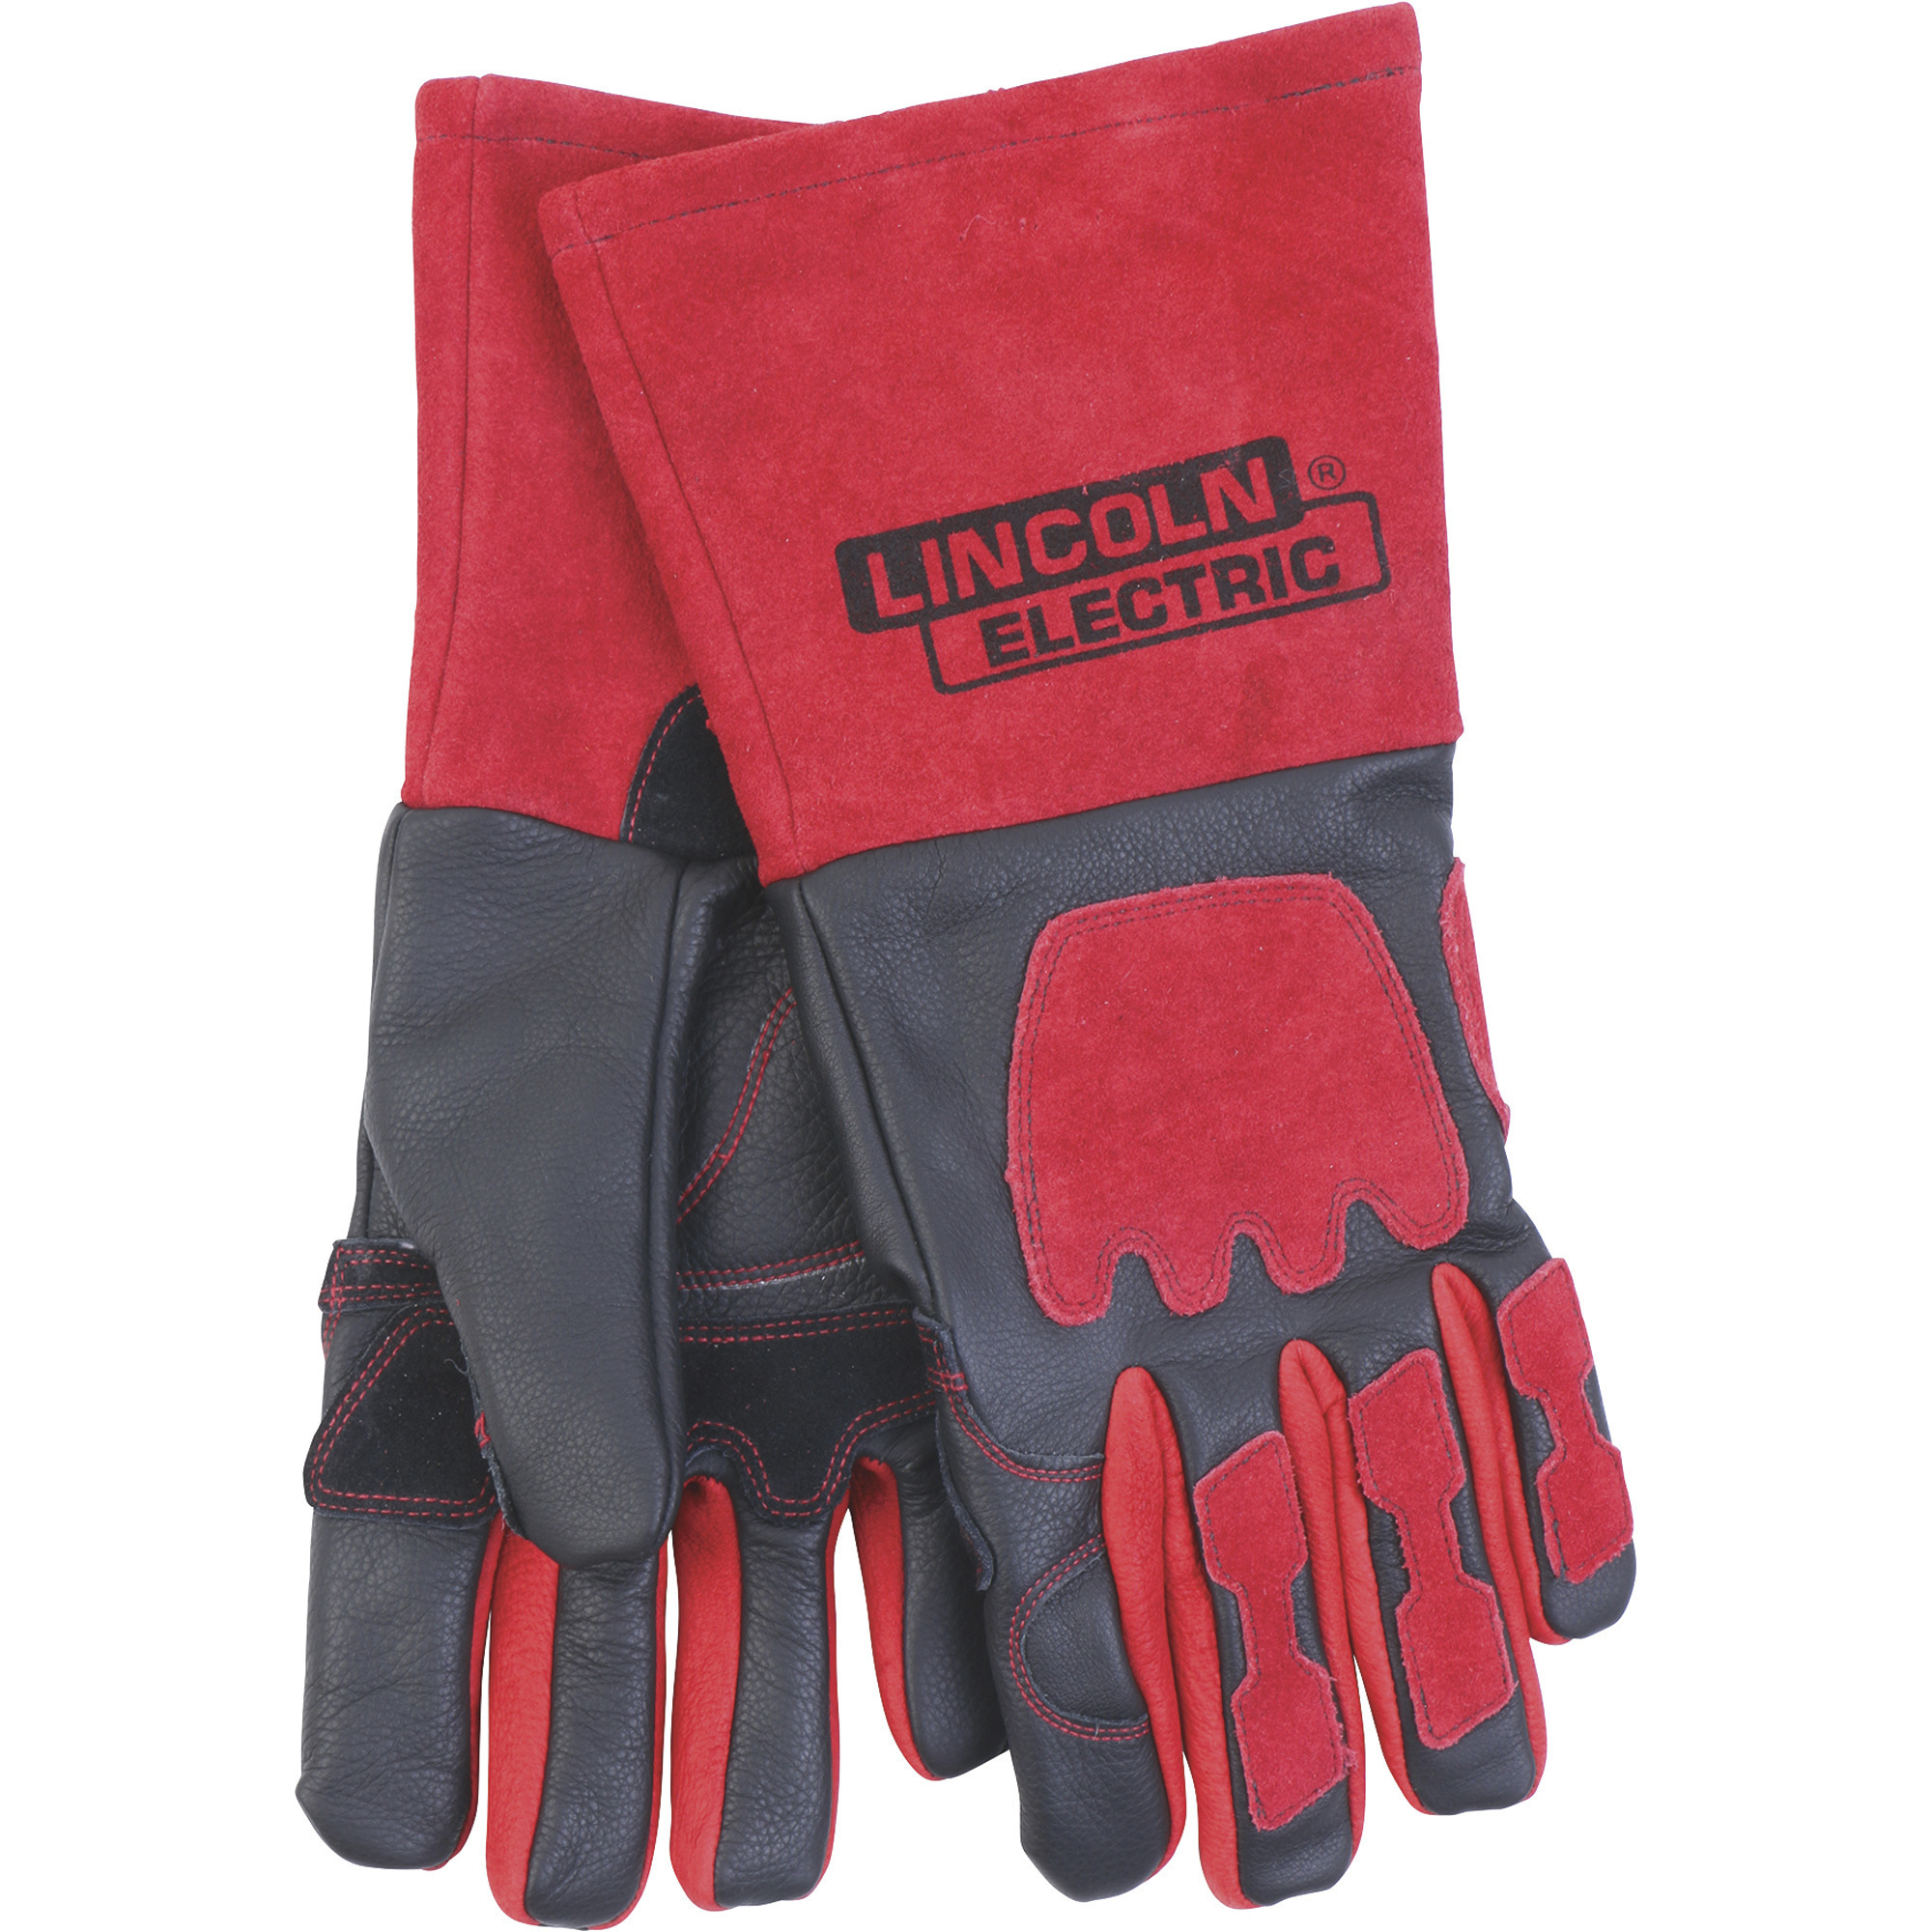 Premier Leather Welding Gloves — Red and Black, One Size Fits Most, Pair, Model - Lincoln Electric KH962